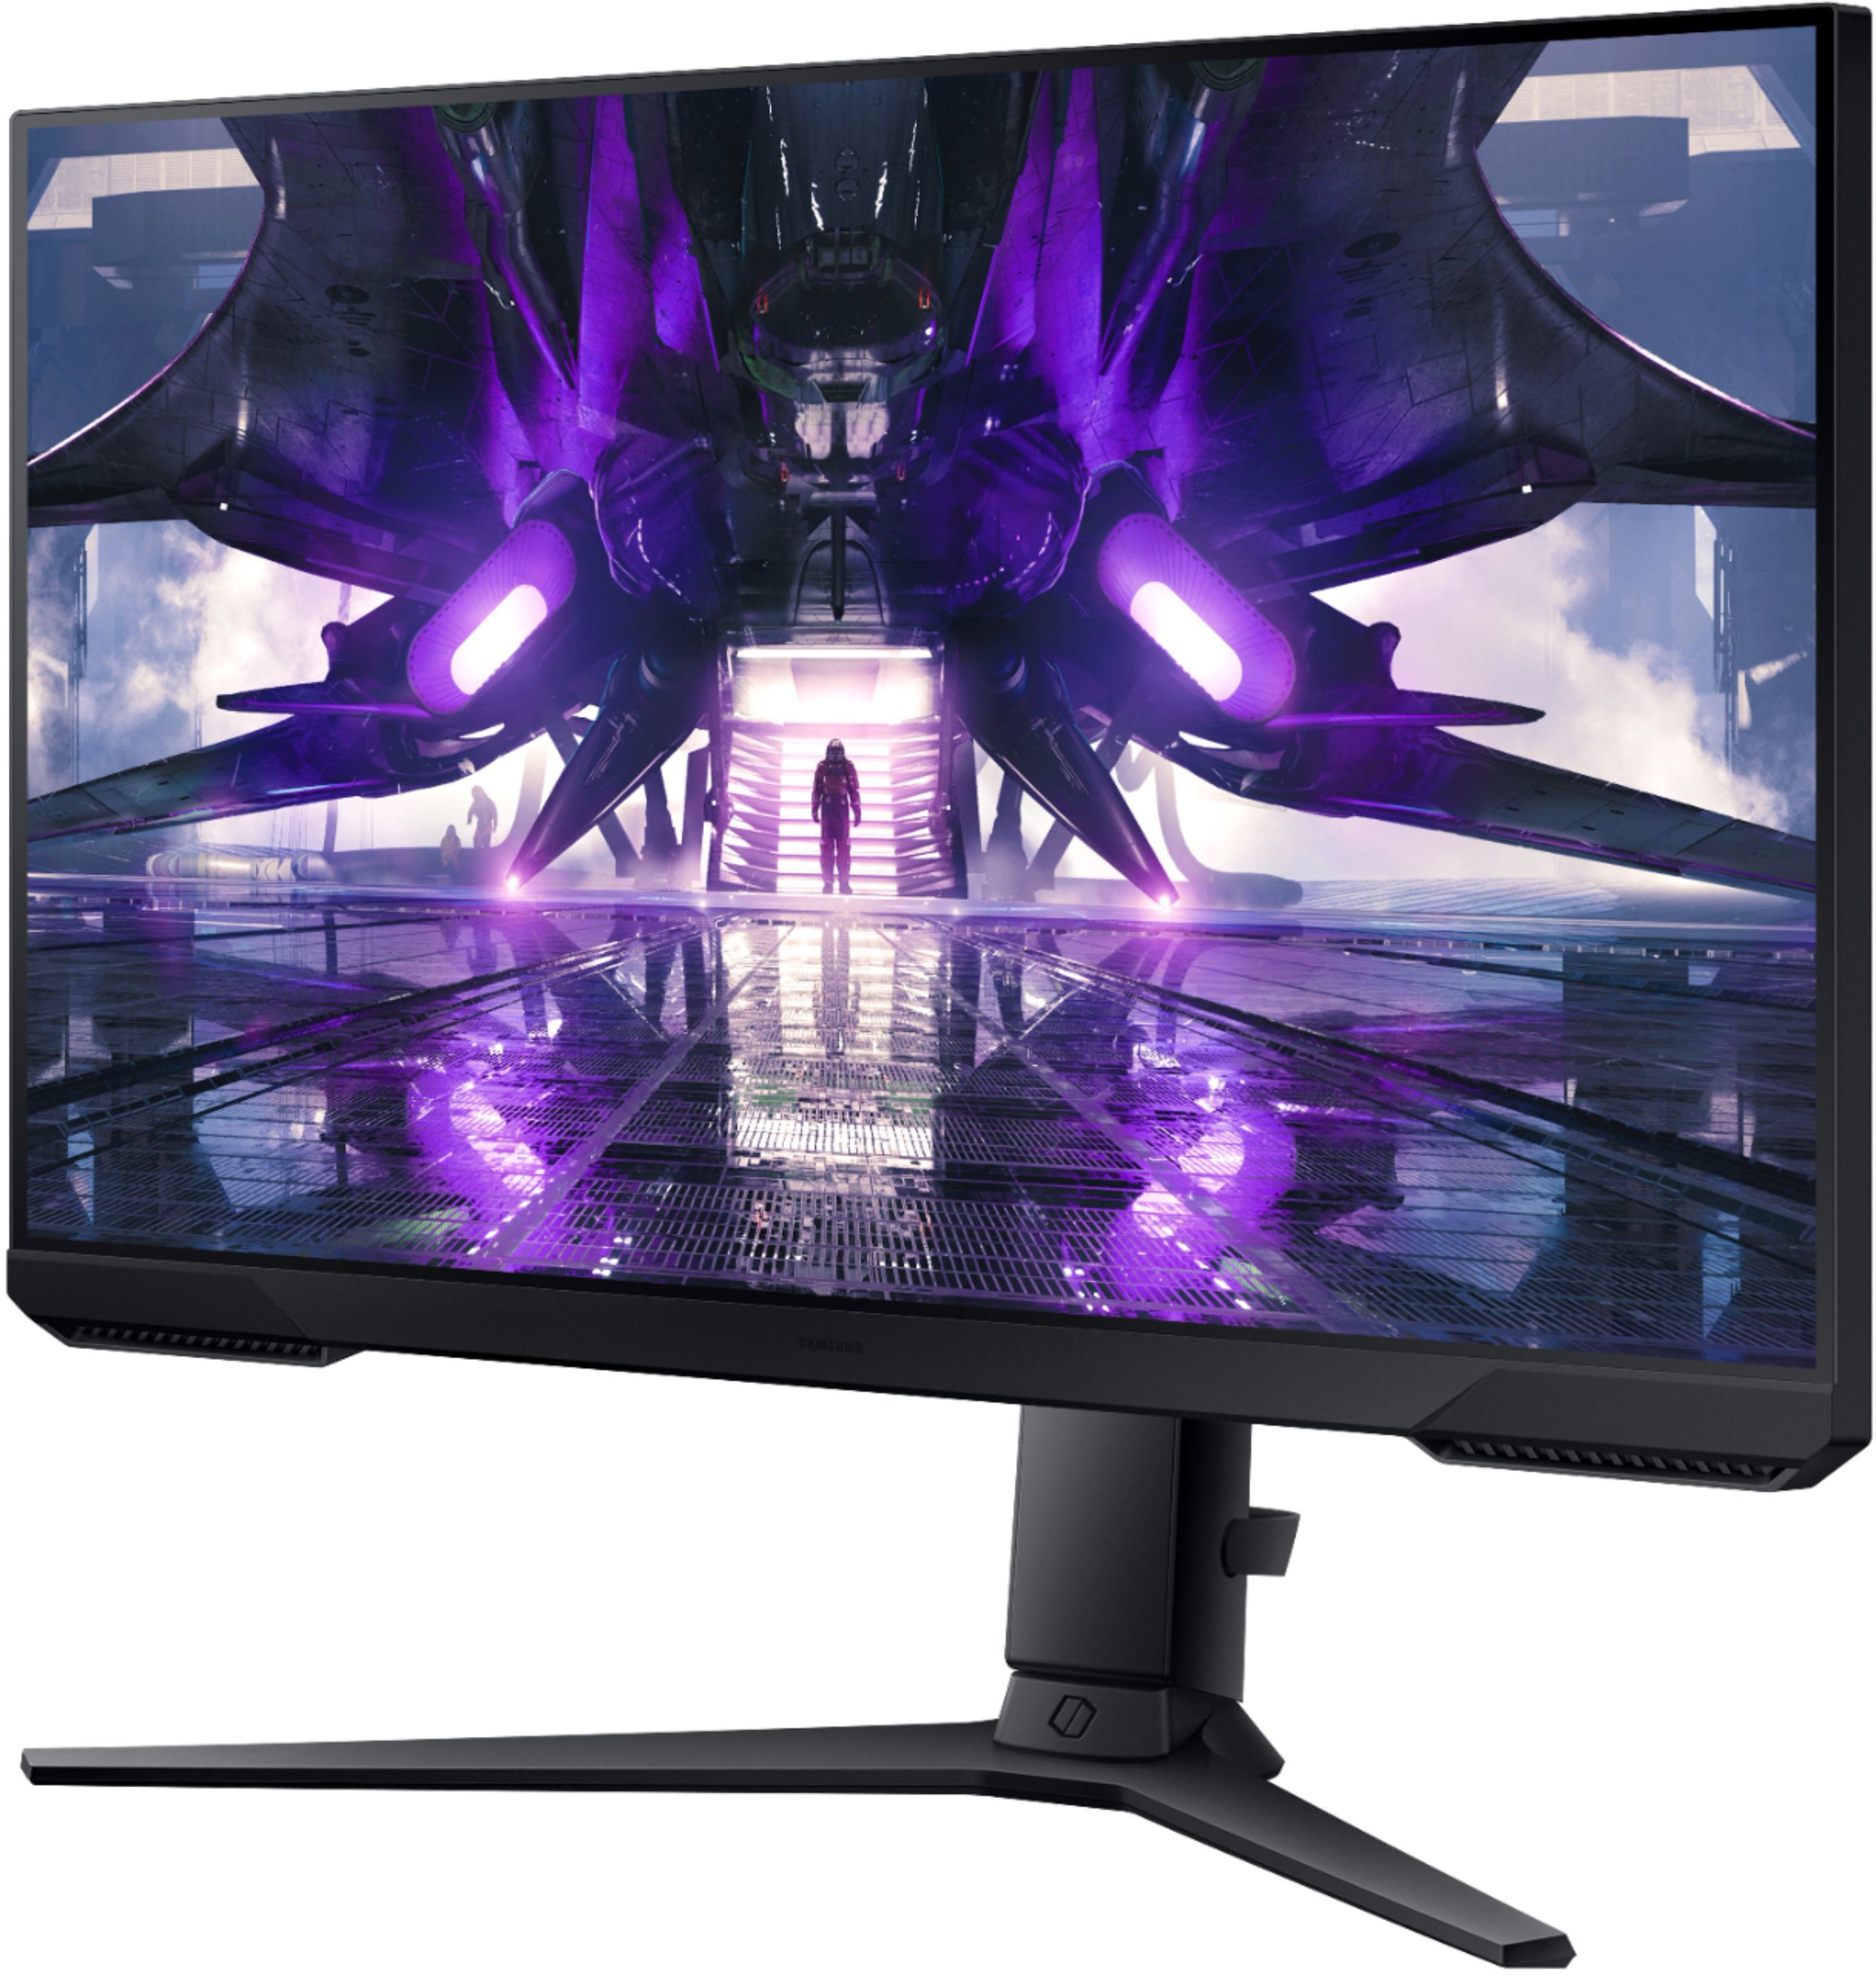 Best gaming monitor deal: Get $90 off the 27-inch Samsung Odyssey